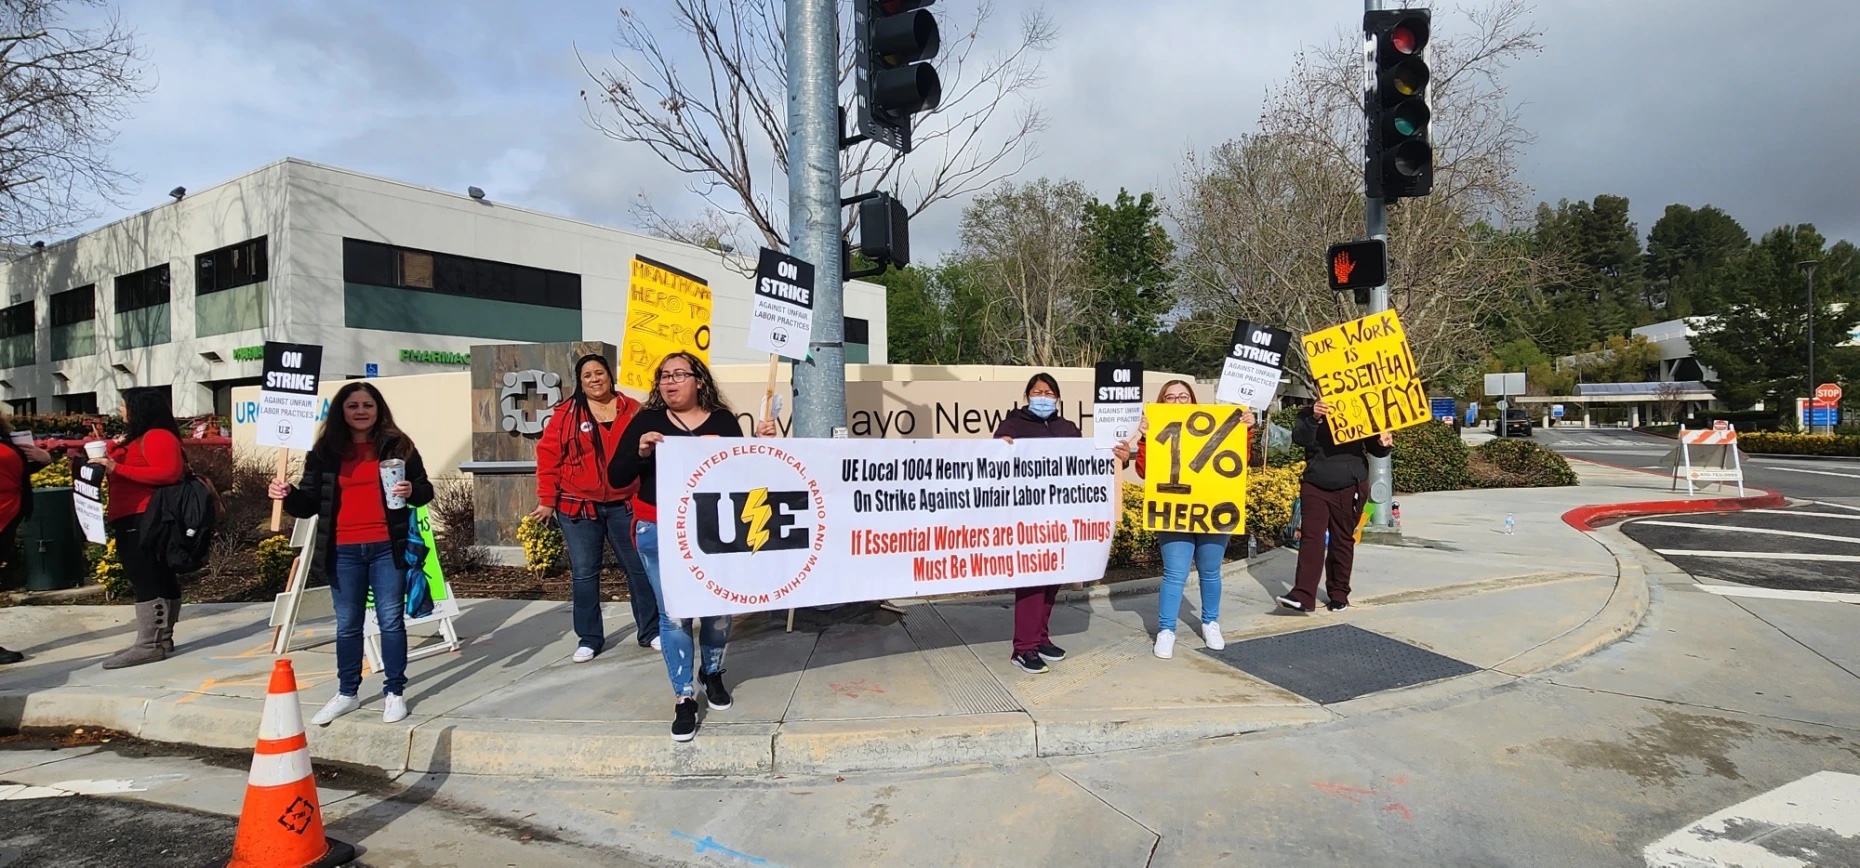 Striking workers with a banner reading UE Local 1004 Henry Mayo Hospital Workers On Strike Against Unfair Labor Practices. If Essential Workers Are Outside, Things Must Be Wrong Inside!